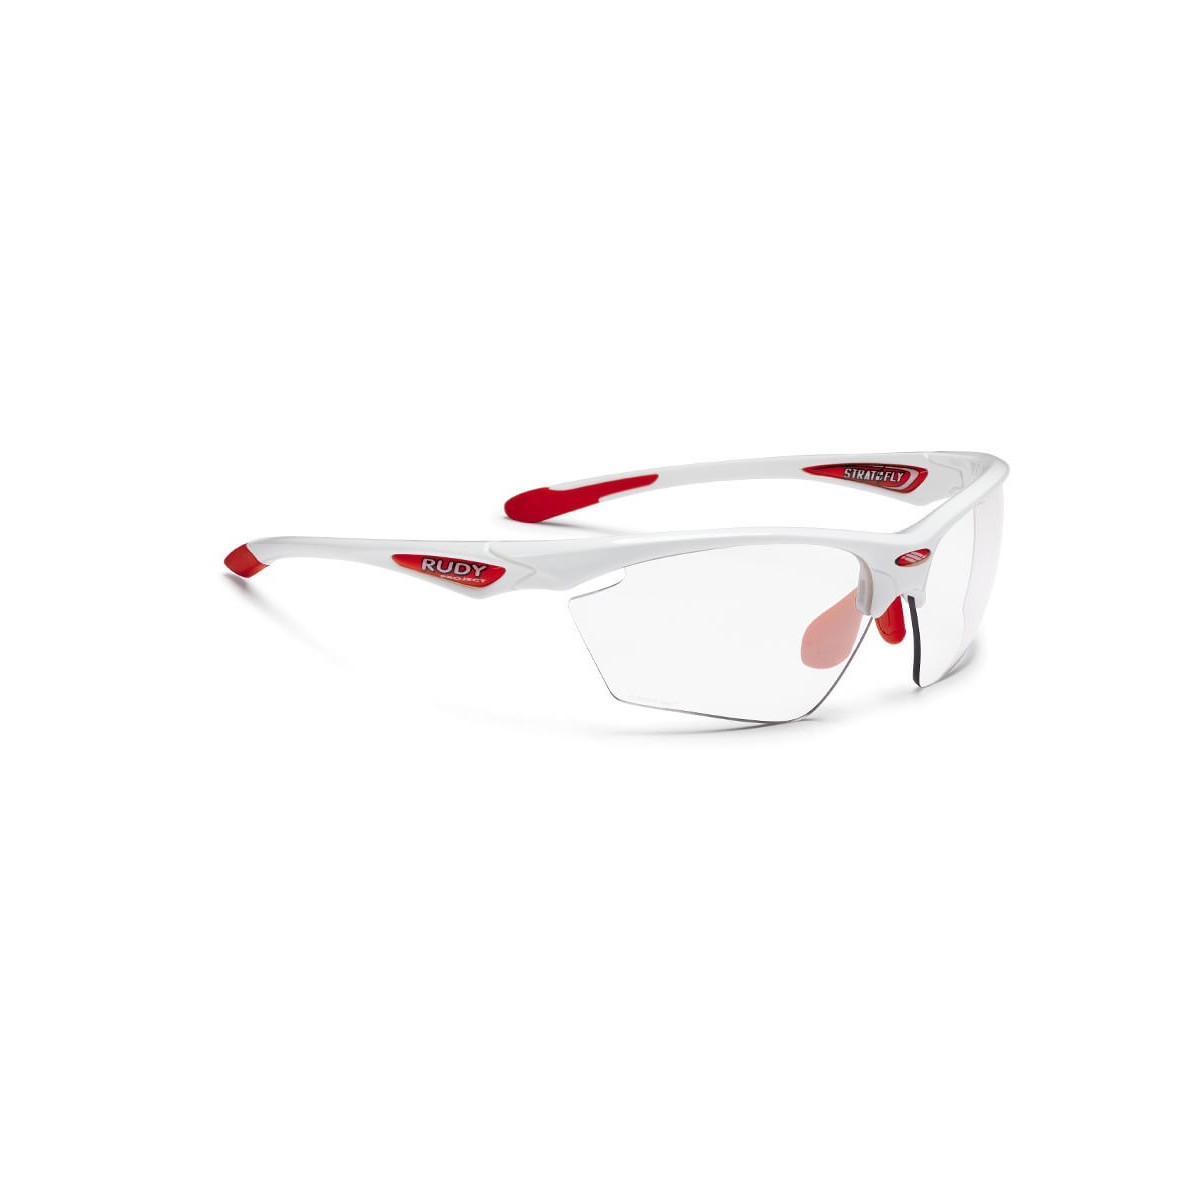 Lunettes Stratofly Blanc Brillant RPO Photoclear Rudy Project